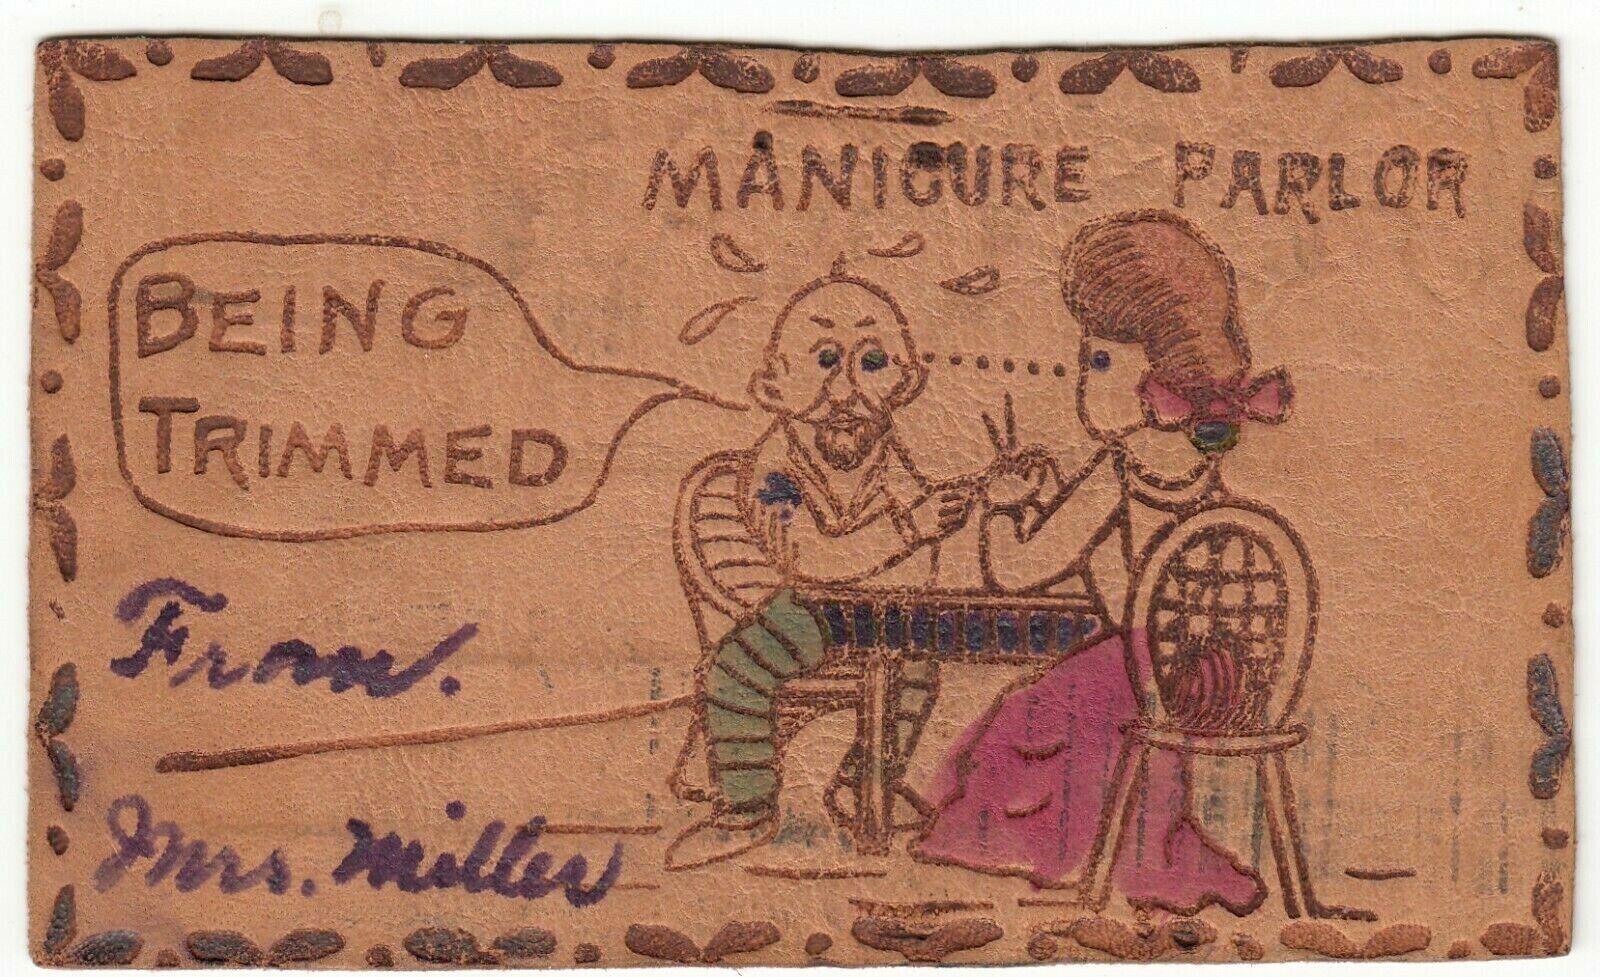 c1906 Vintage Manicure Parlor Being Trimmed Occupational Comic Leather Postcard